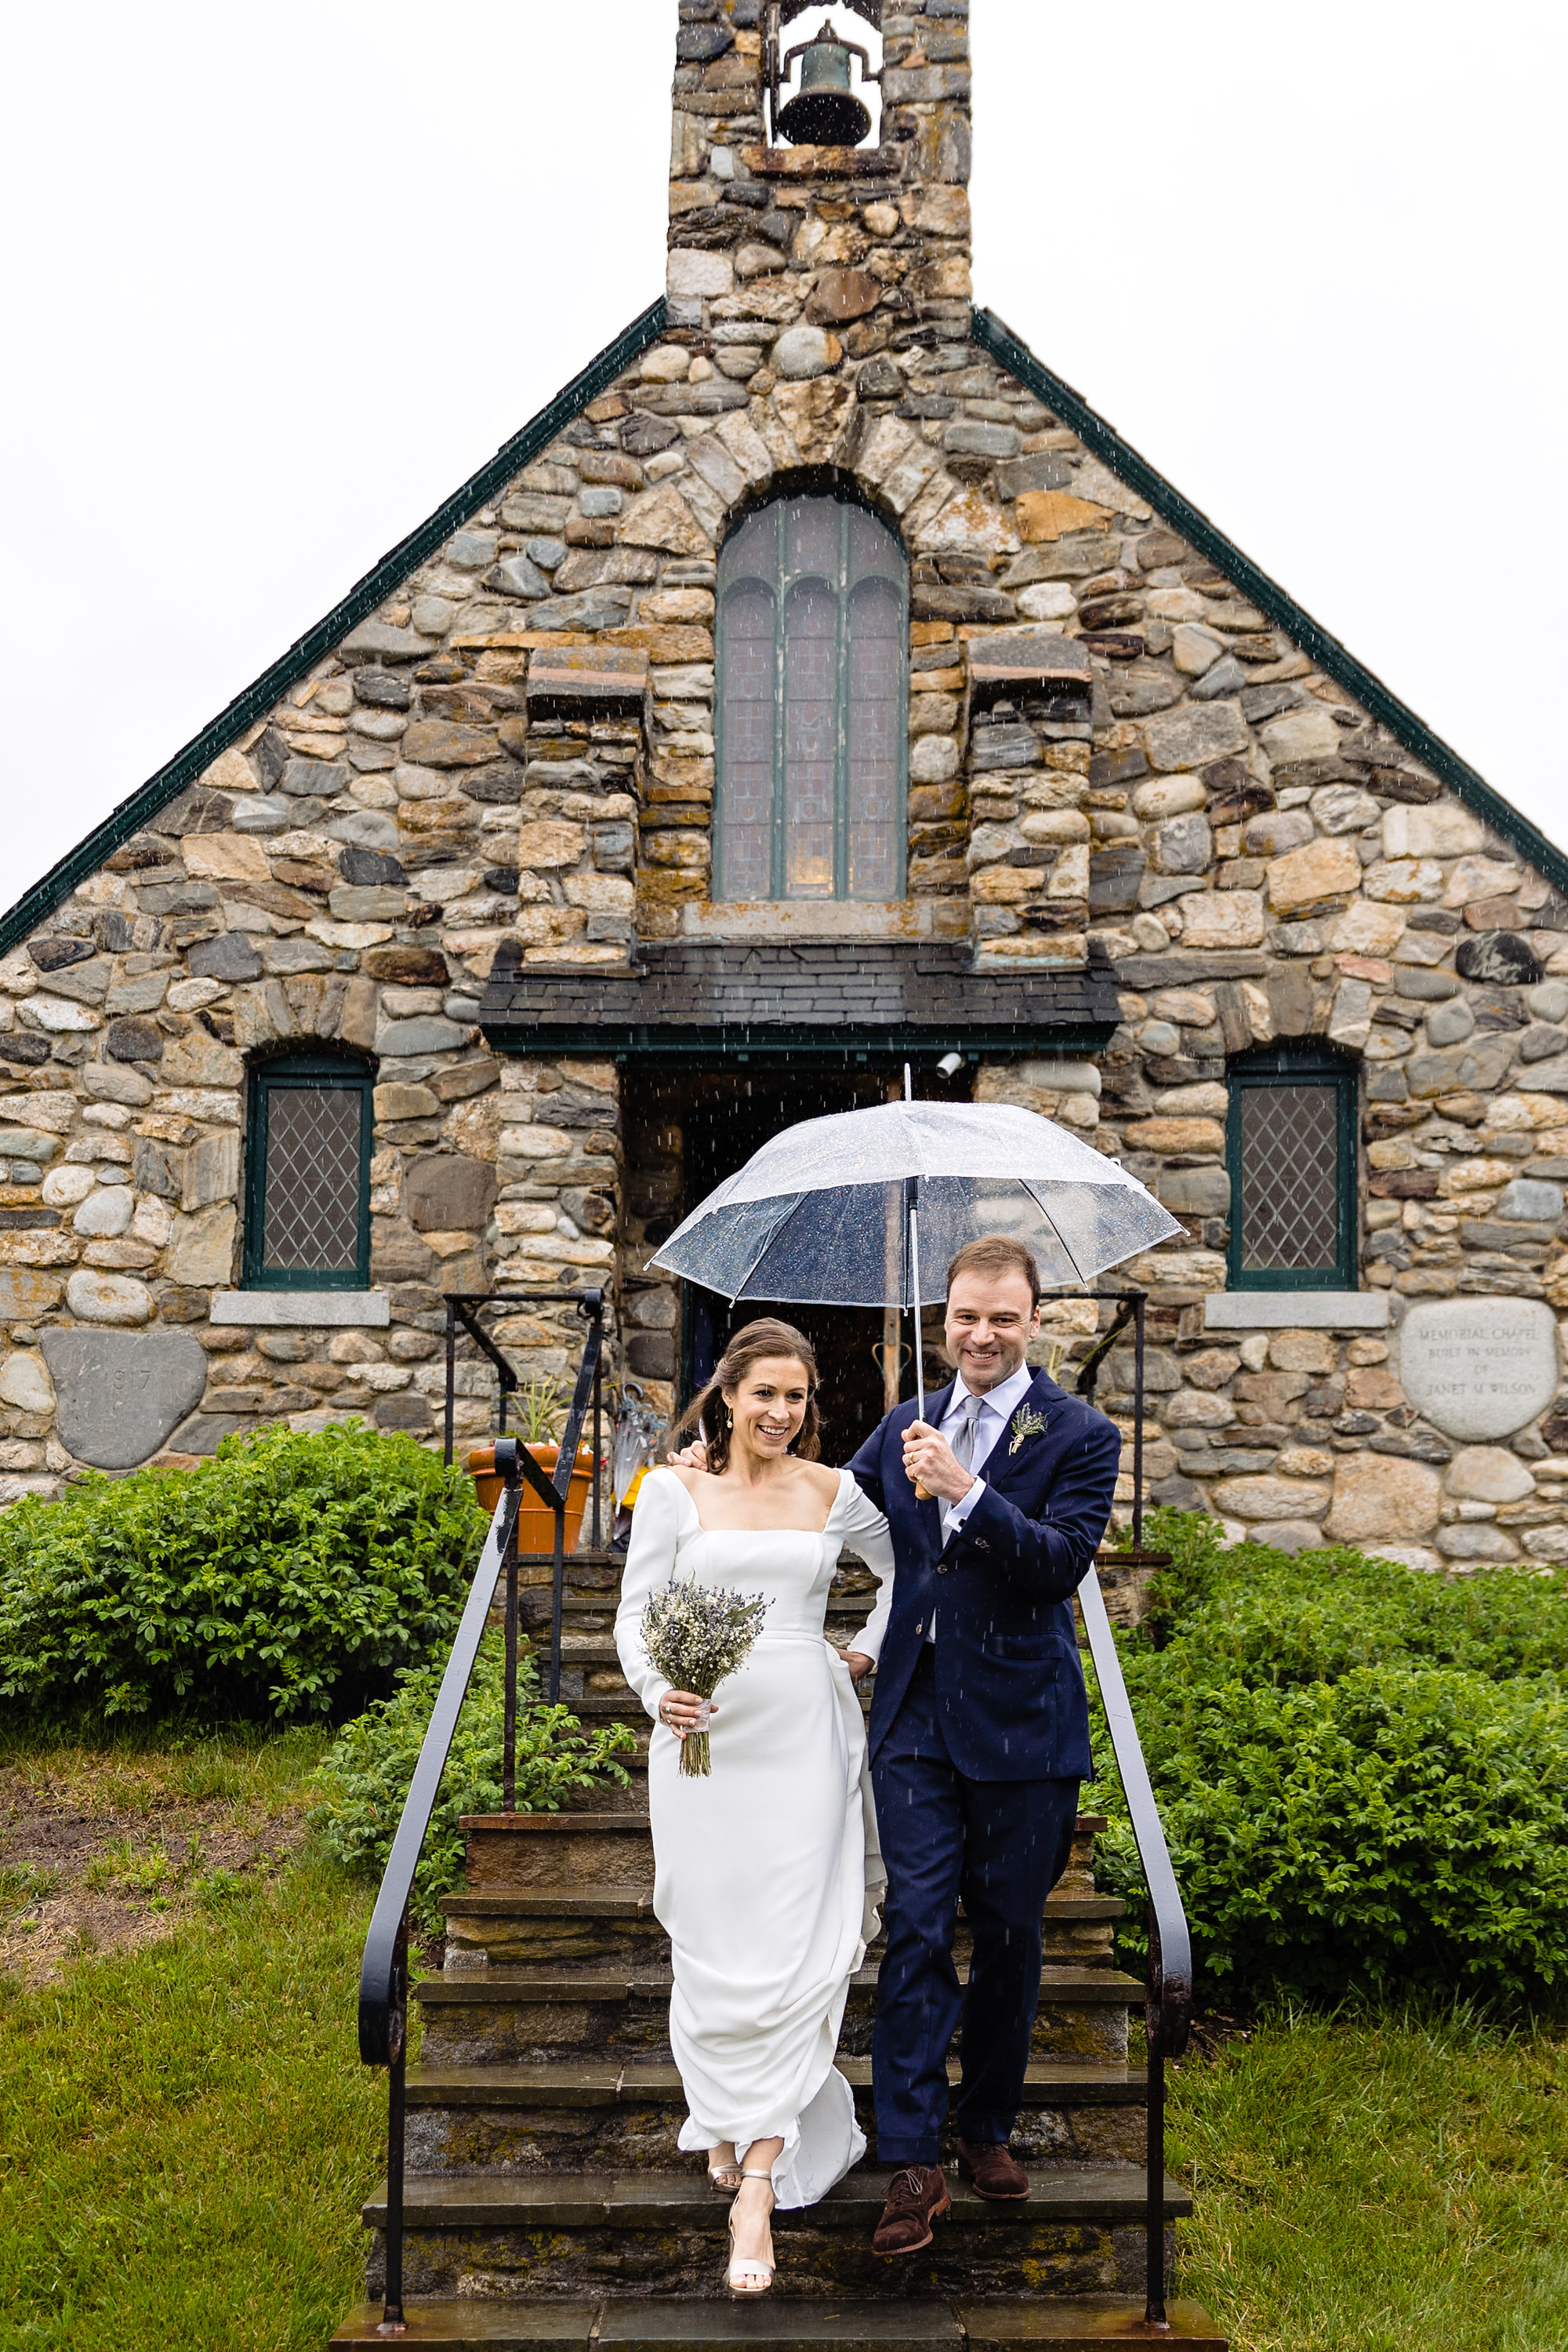 A wedding couple leave the Wilson Memorial Chapel wedding ceremony on a rainy day.